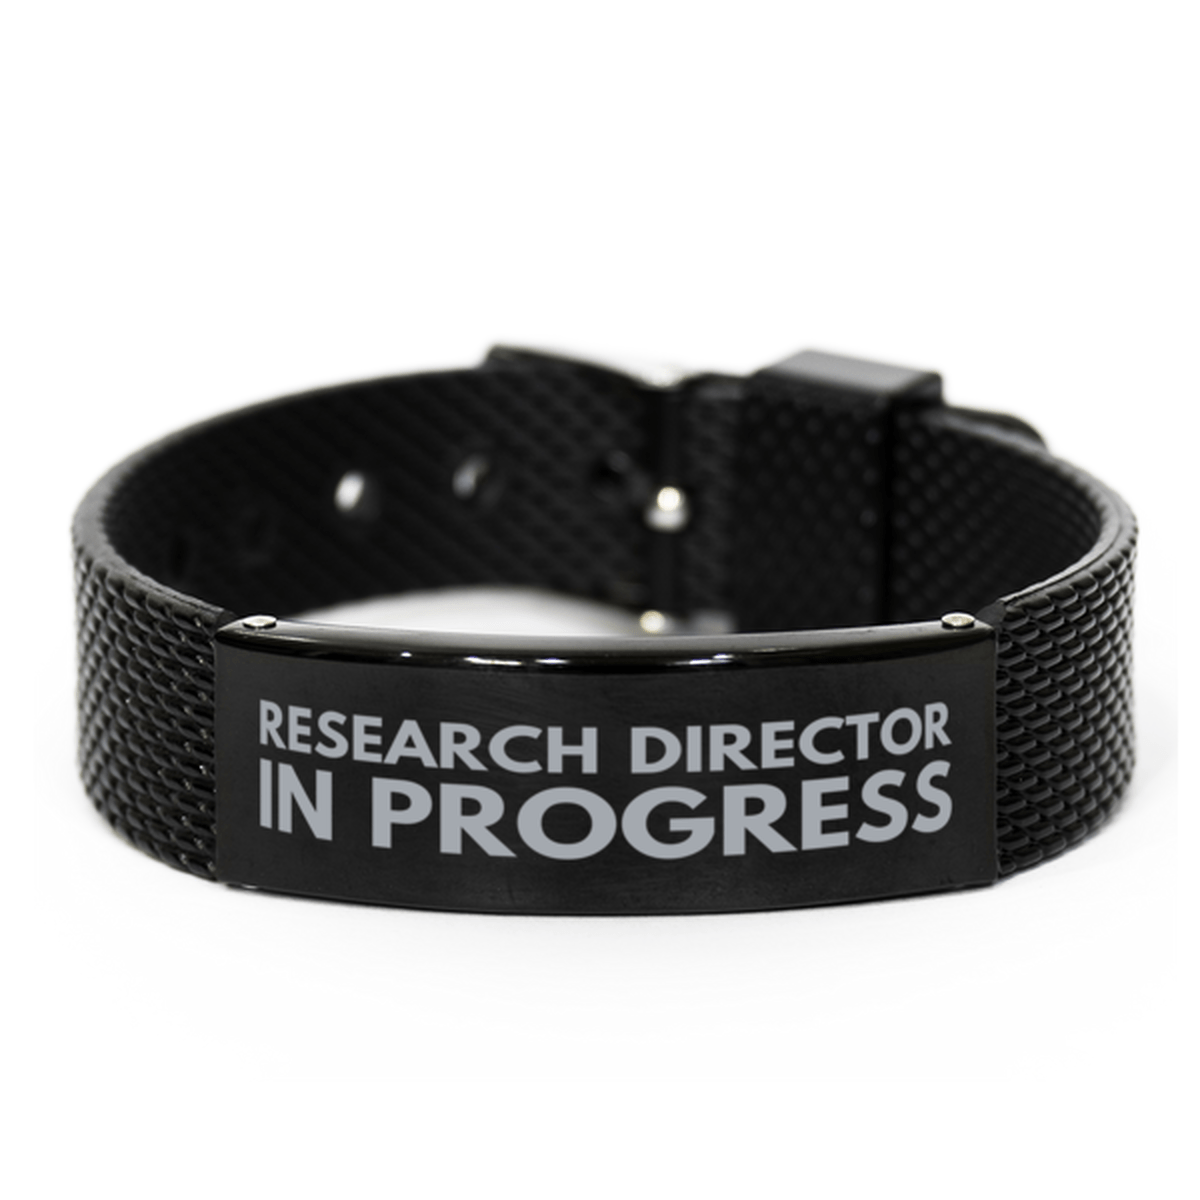 Inspirational Research Director Black Shark Mesh Bracelet, Research Director In Progress, Best Graduation Gifts for Students